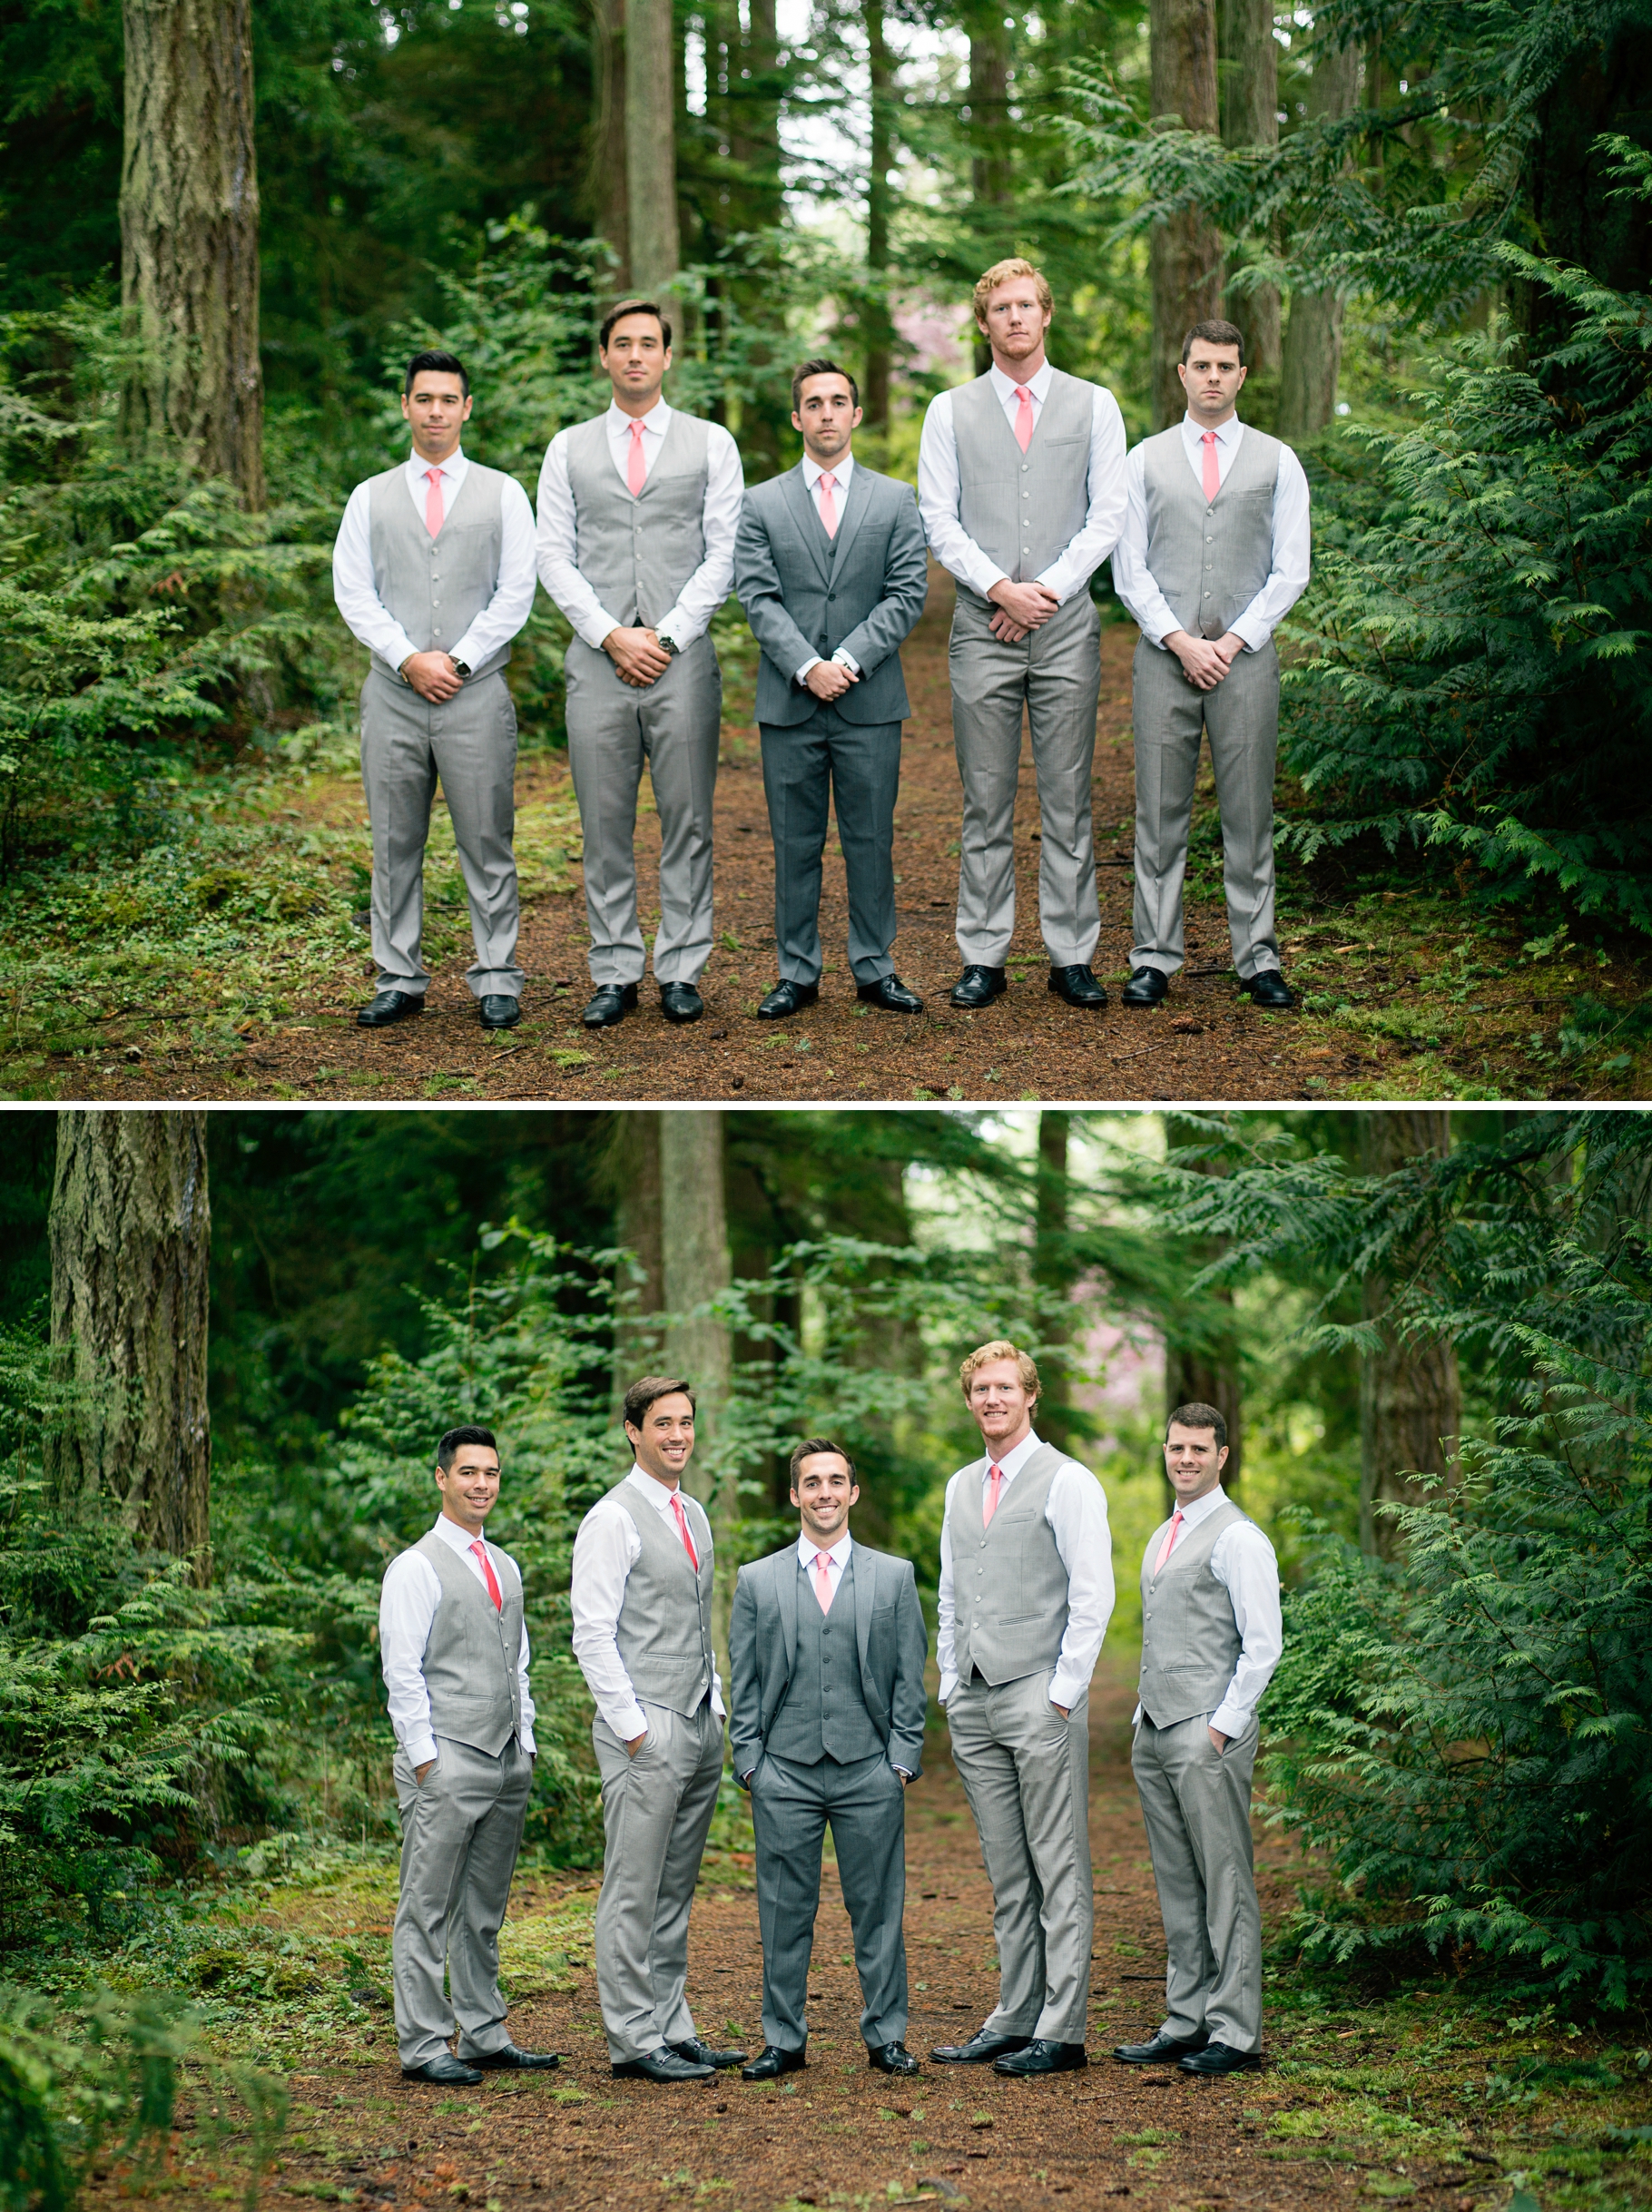 21-Groom-Groomsmen-Portraits-Grey-Suit-wooded-bluff-olympic-mountains-log-cabin-Kitsap-Memorial-State-Park-Forest-Northwest-Photographer-Seattle-Wedding-Photography-by-Betty-Elaine